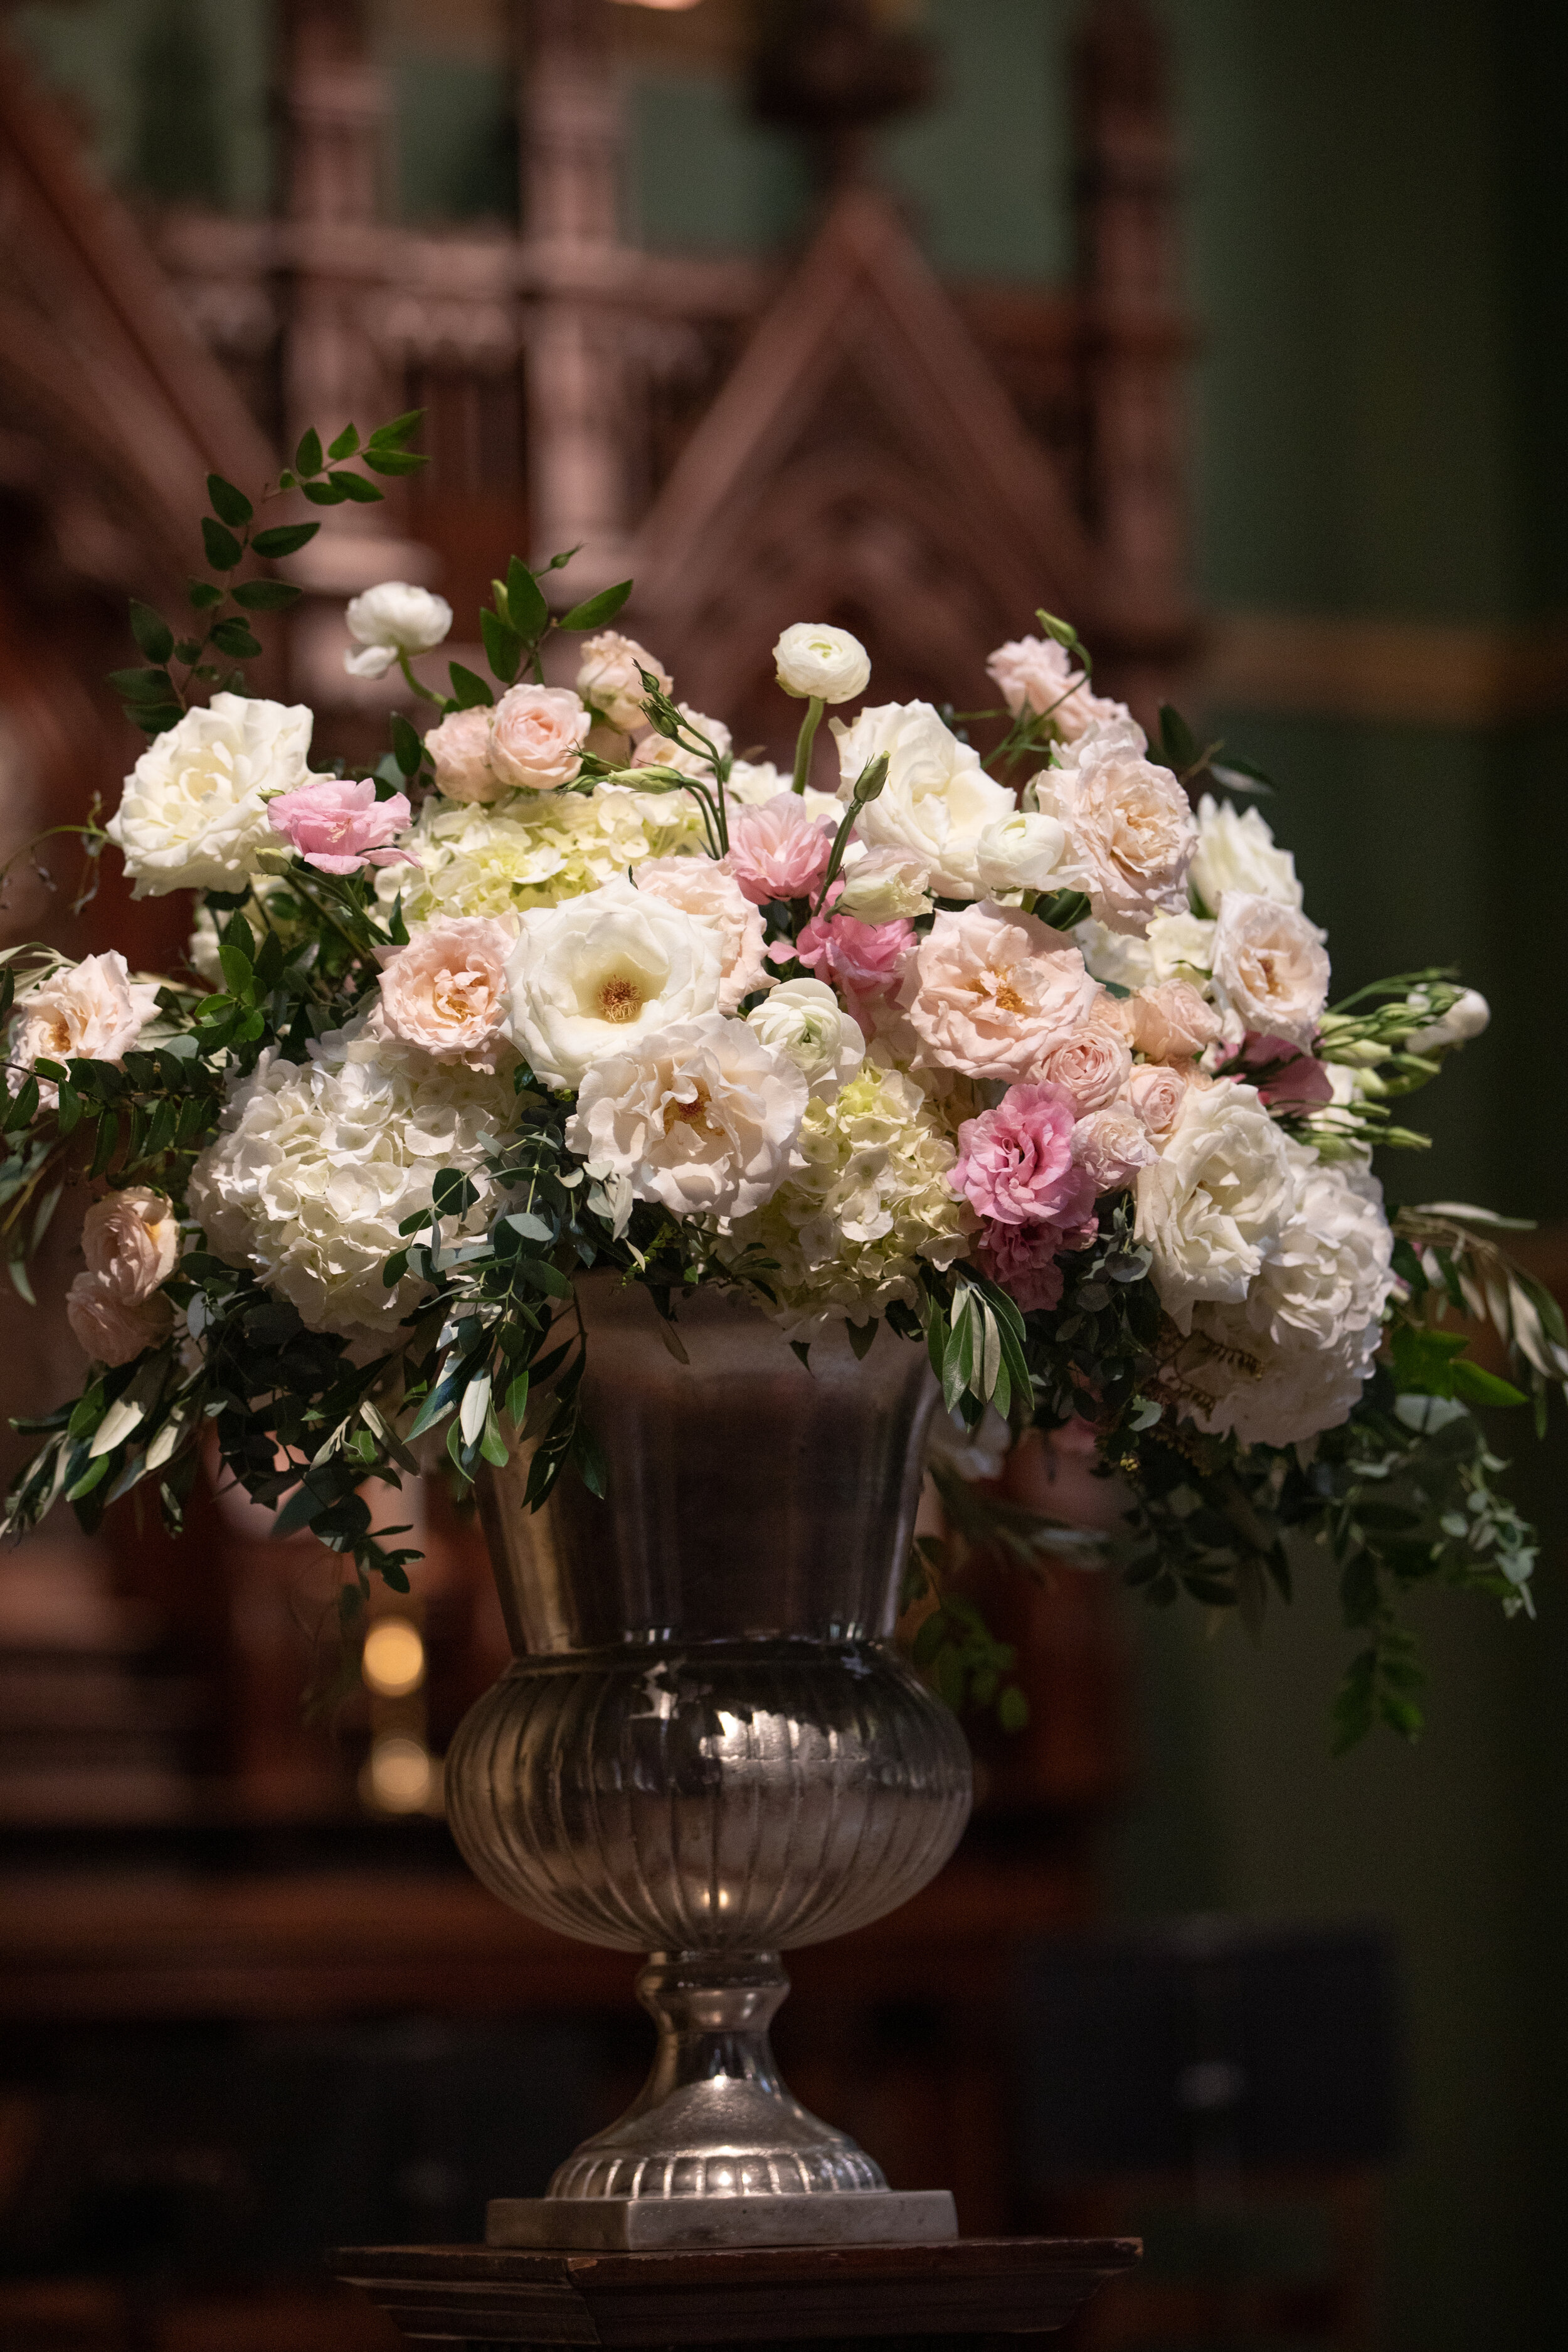 Elegant summer wedding at Christ Church Cathedral with blush, ivory, and greenery floral design. Nashville event florist, Rosemary & Finch.